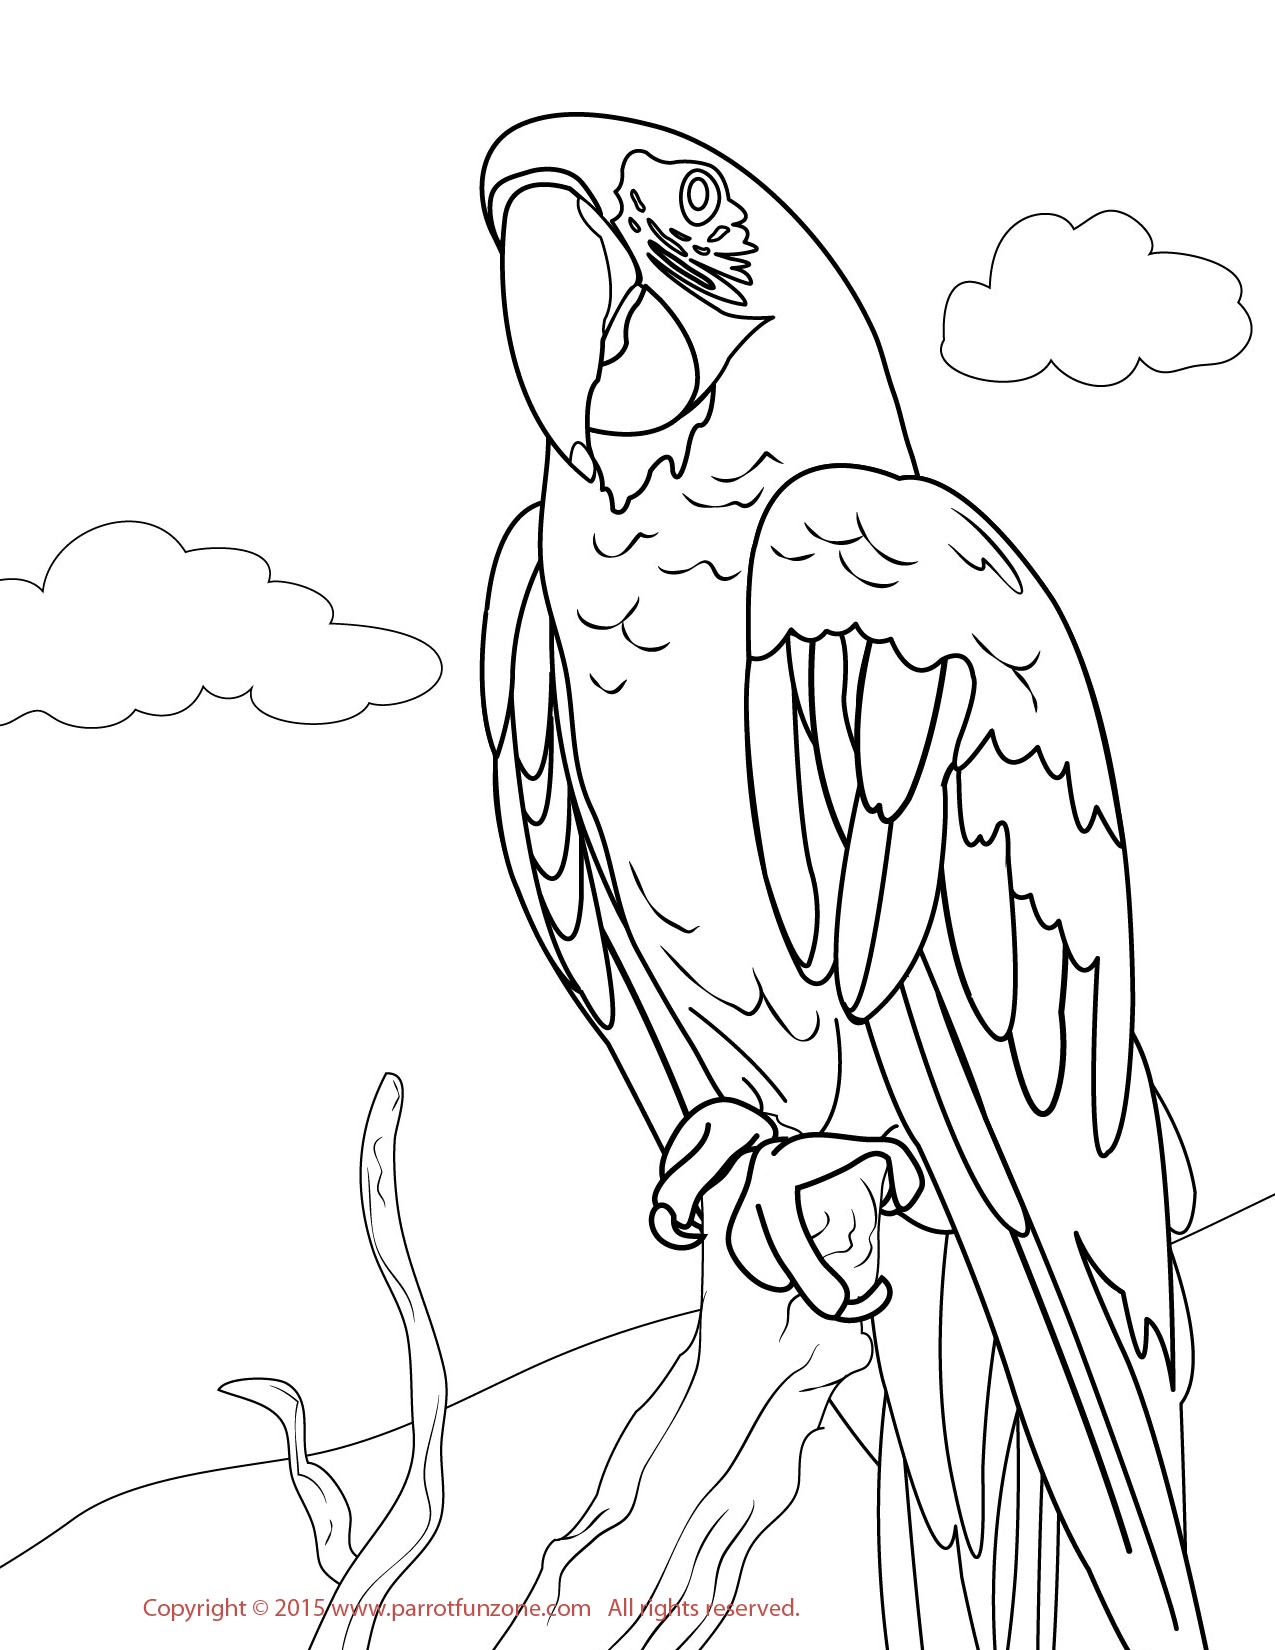 greenwing macaw coloring page